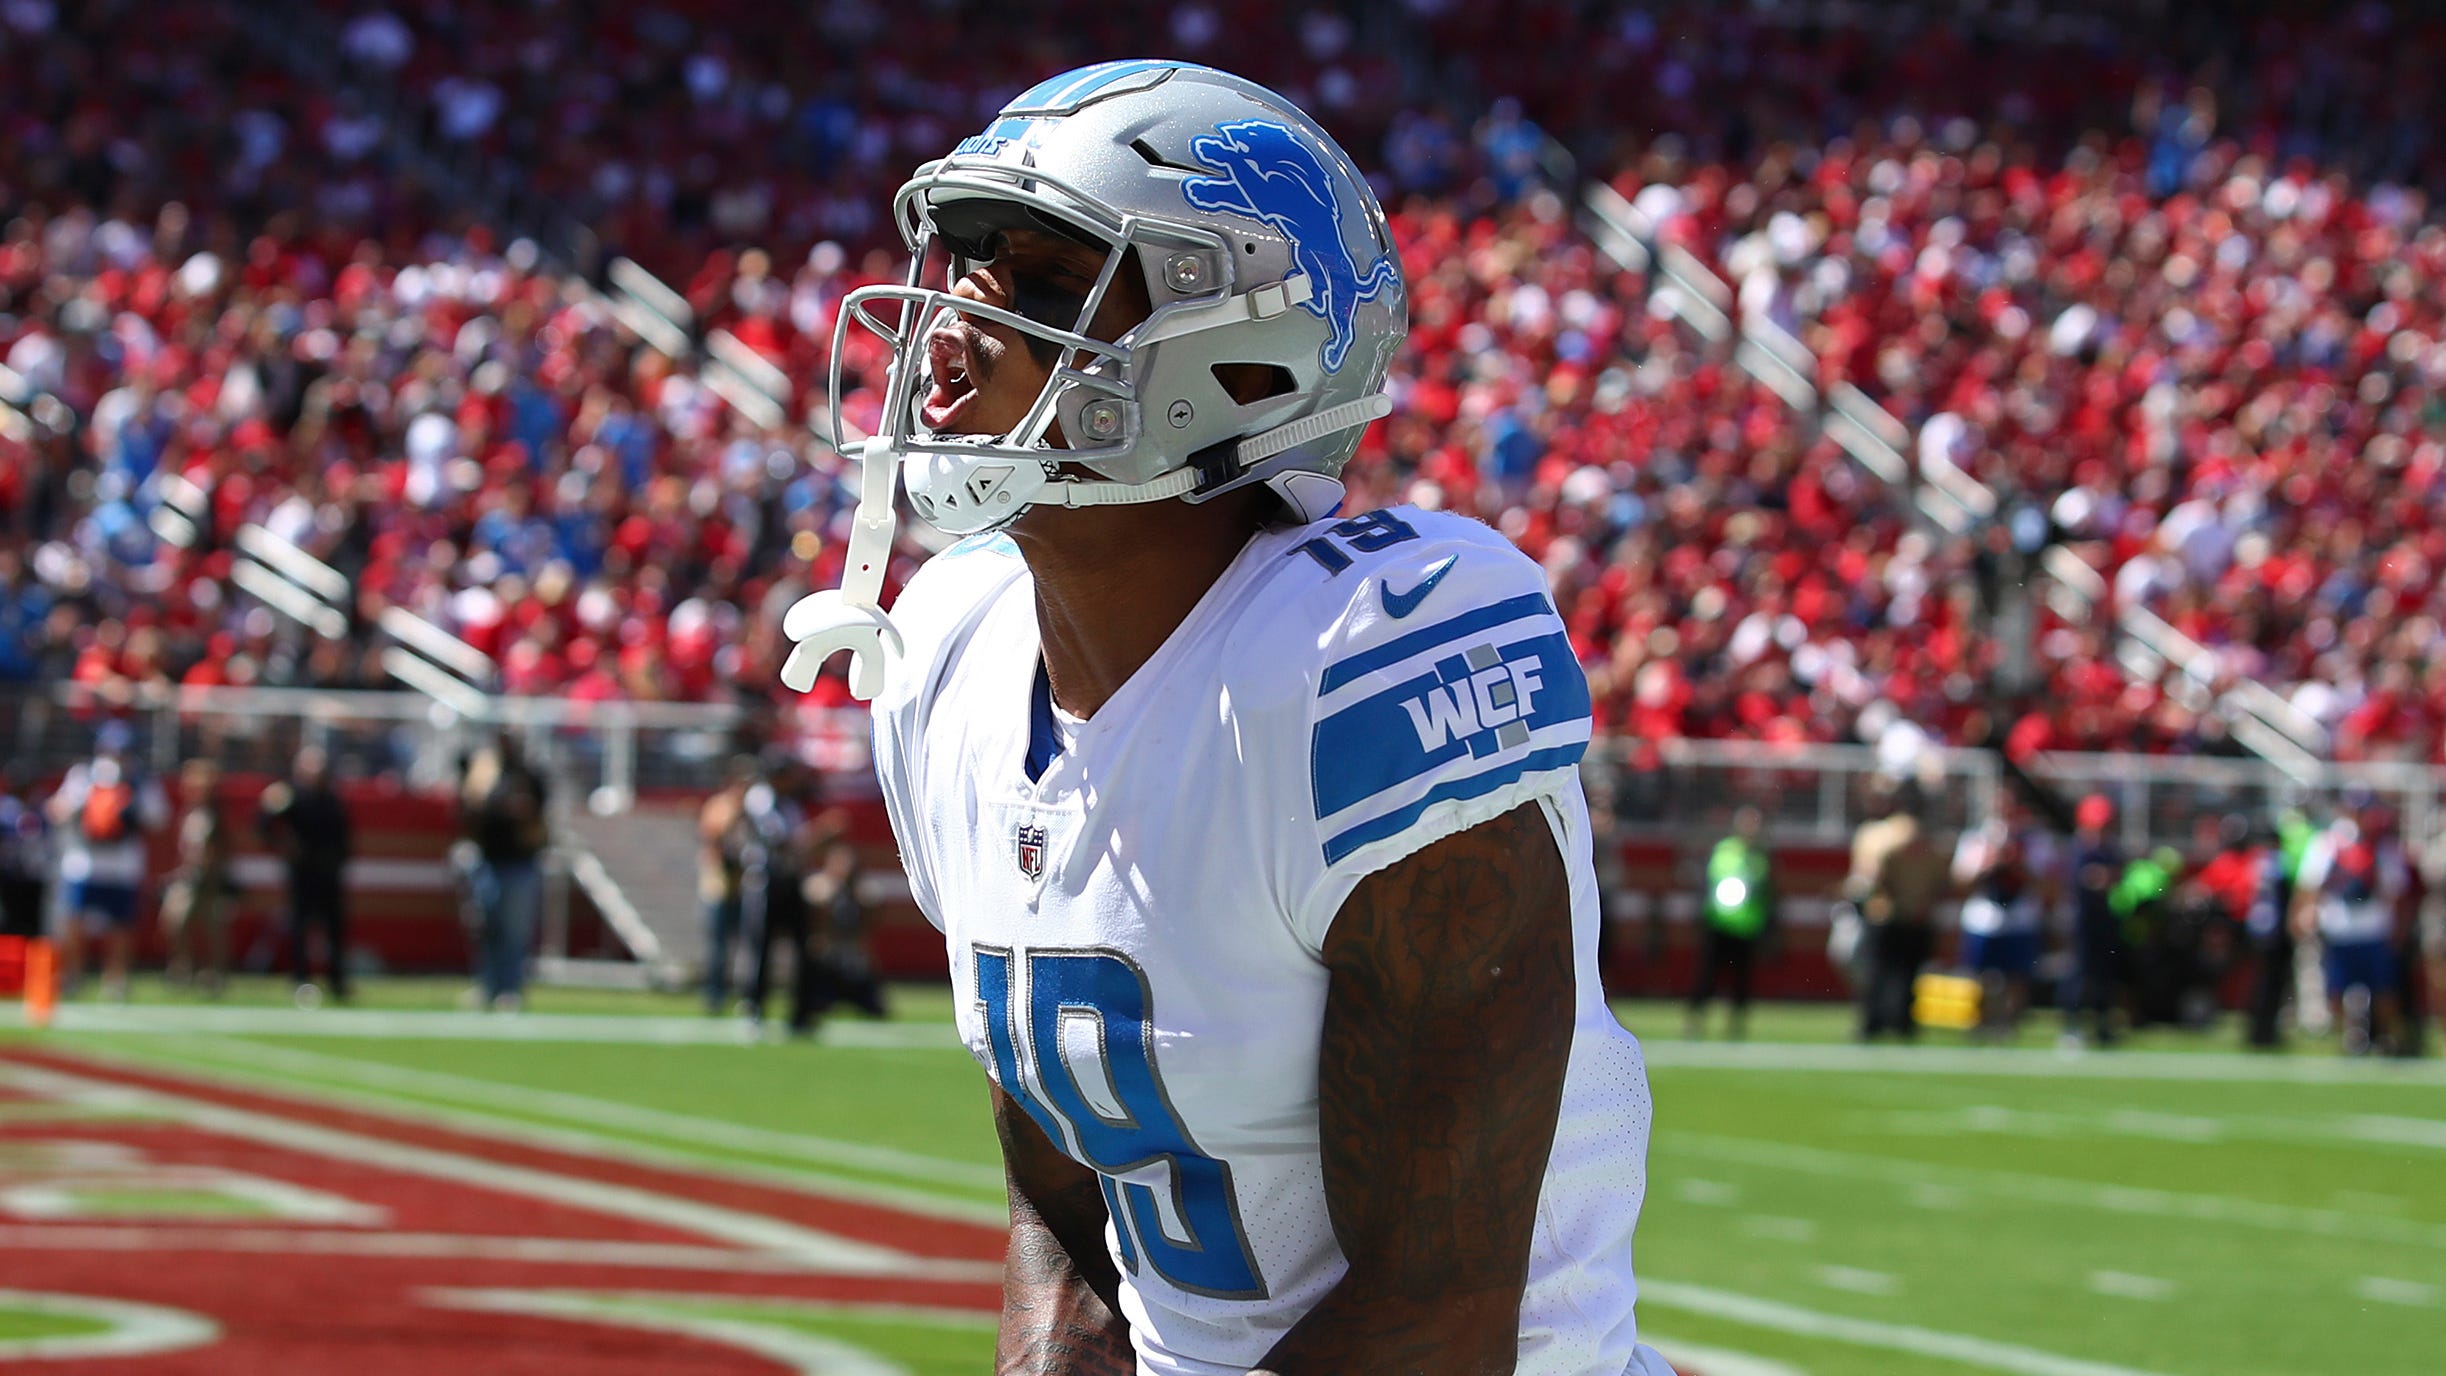 Lions wide receiver Kenny Golladay celebrates after scoring a touchdown during the first half on Sunday, Sept. 16, 2018, in Santa Clara, Calif.